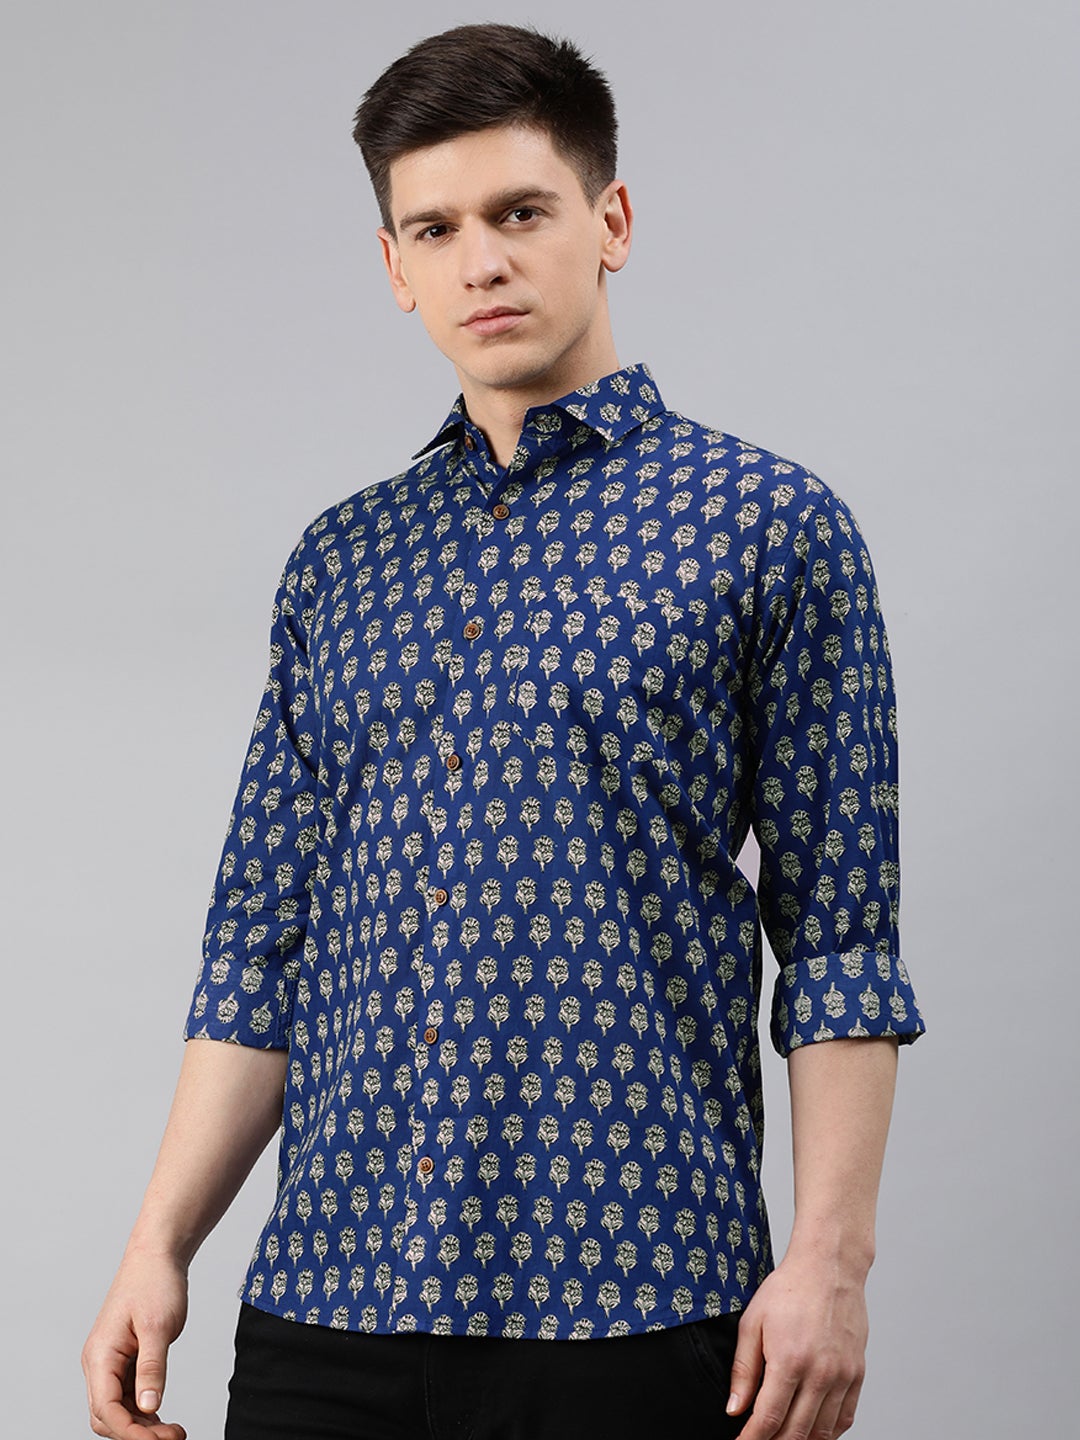 Blue Cotton Full Sleeves Shirts For Men